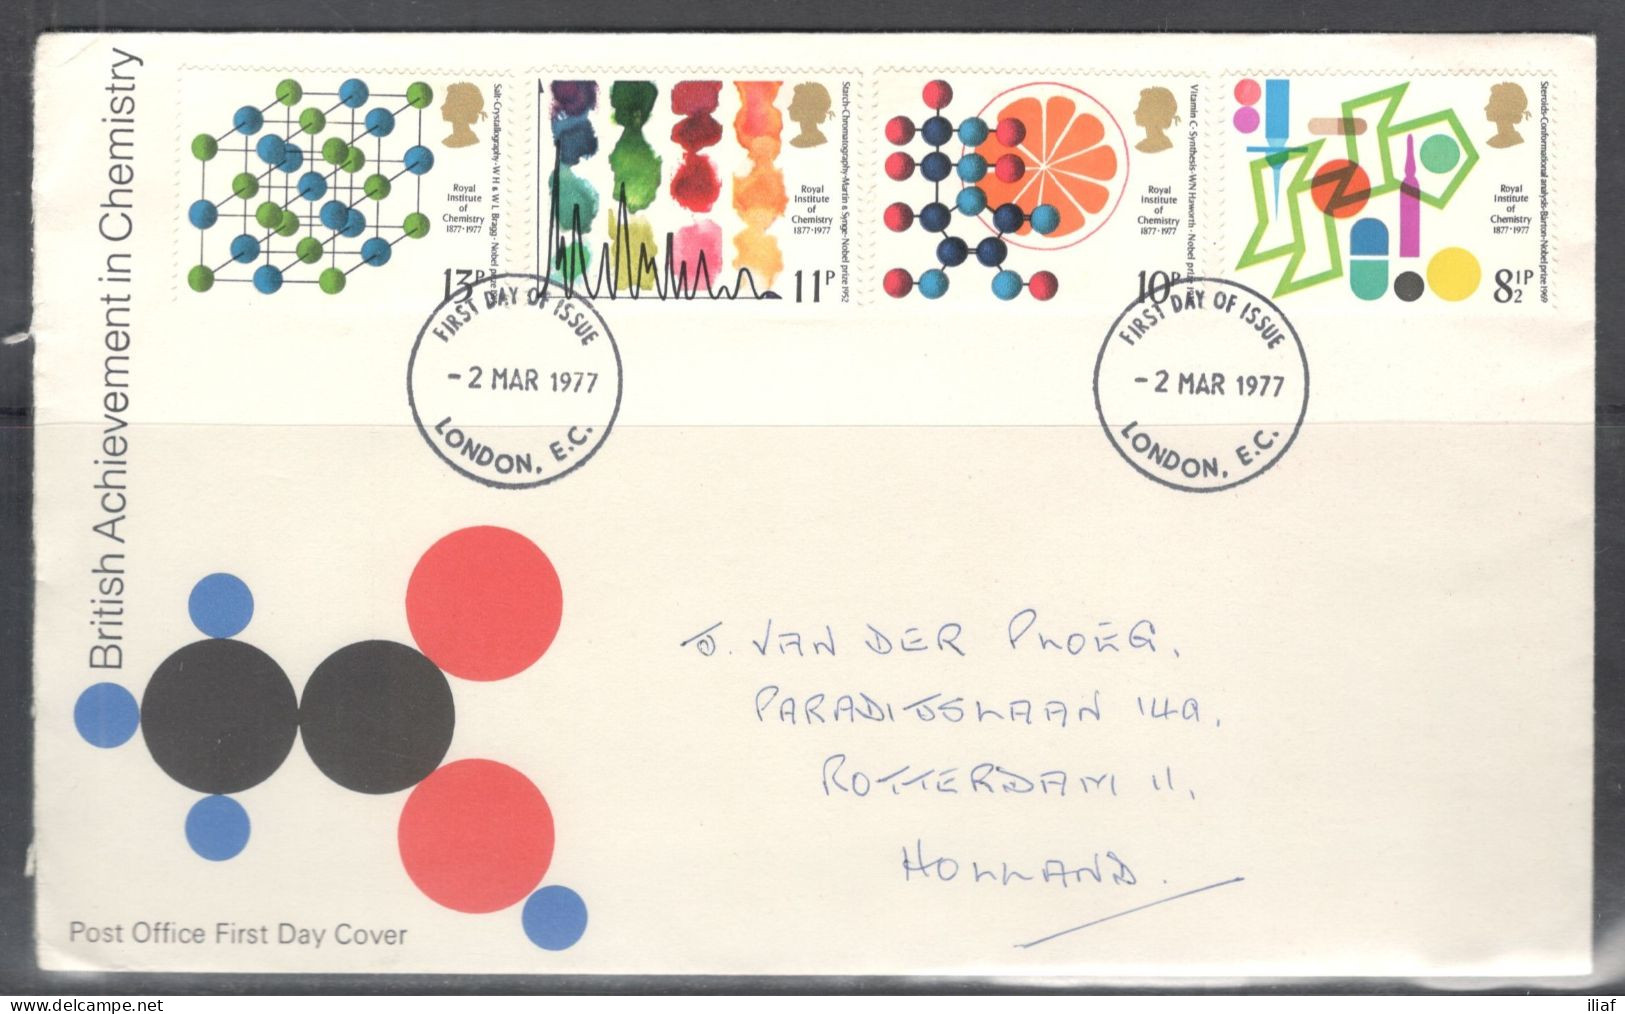 United Kingdom Of Great Britain.  FDC Sc. 806-809.  Royal Institute Of Chemistry Centenary.  FDC Cancellation On FDC Env - 1971-1980 Decimal Issues